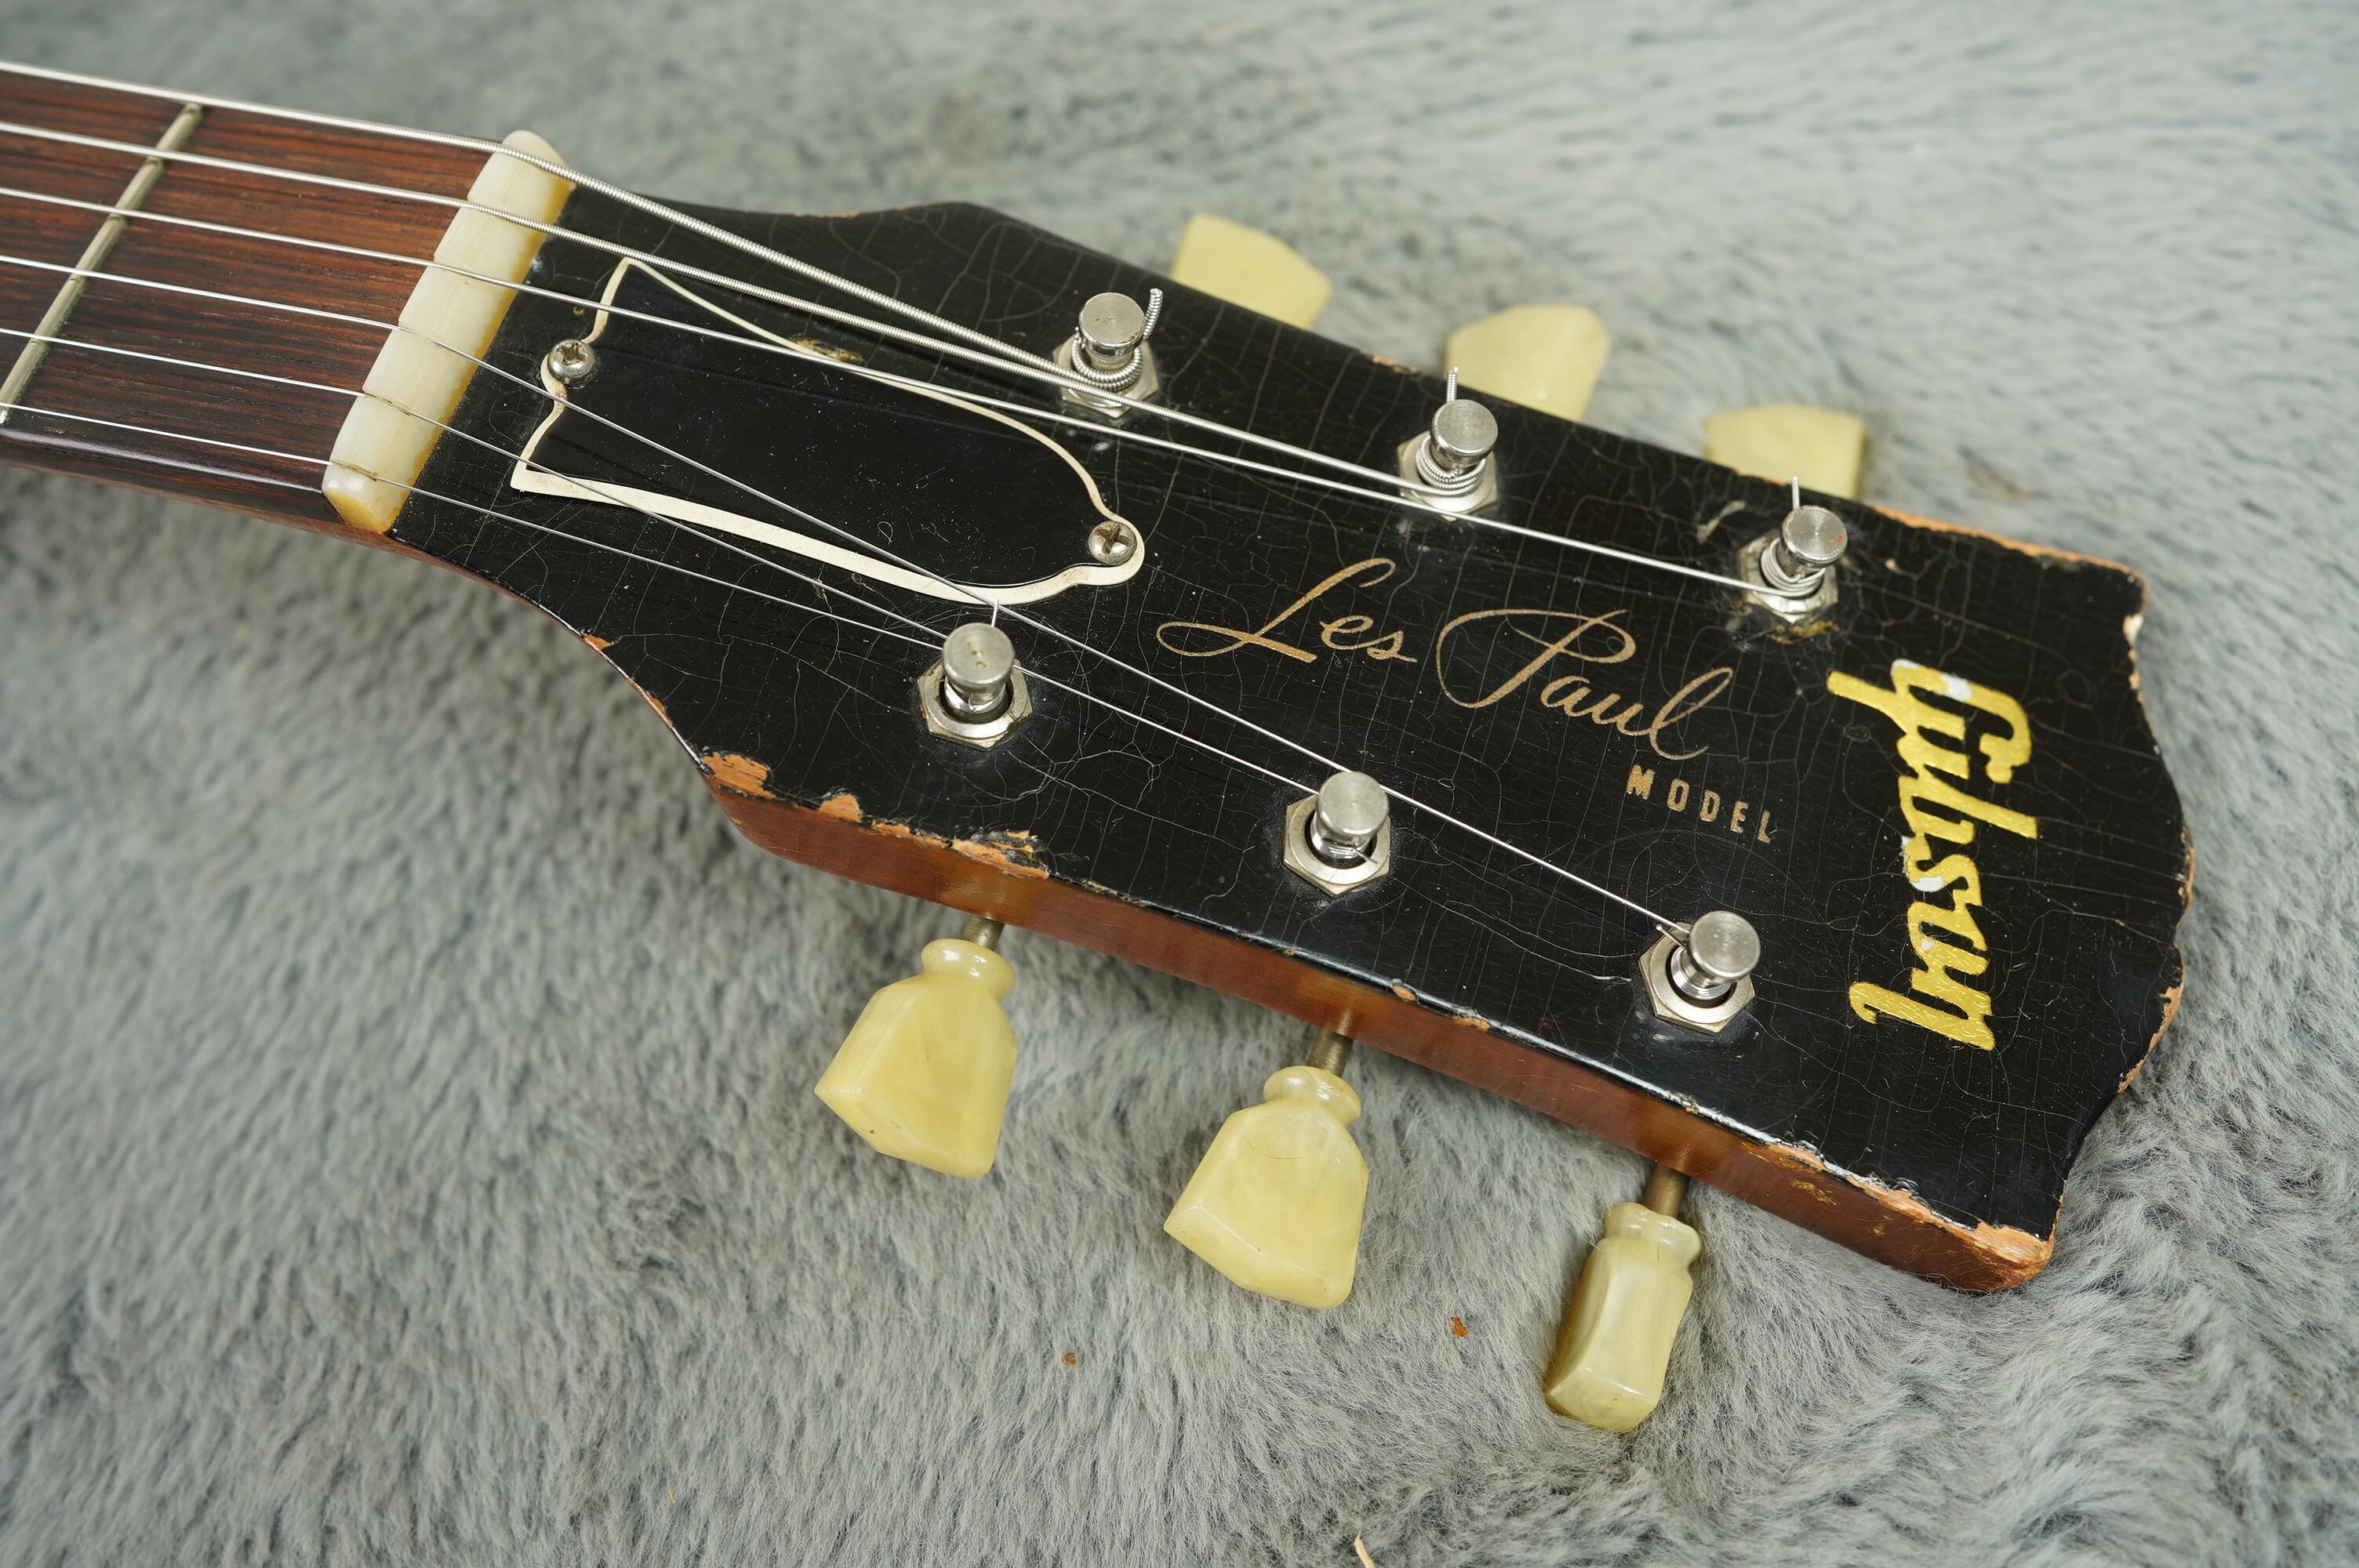 1952 Gibson Les Paul Goldtop early unbound